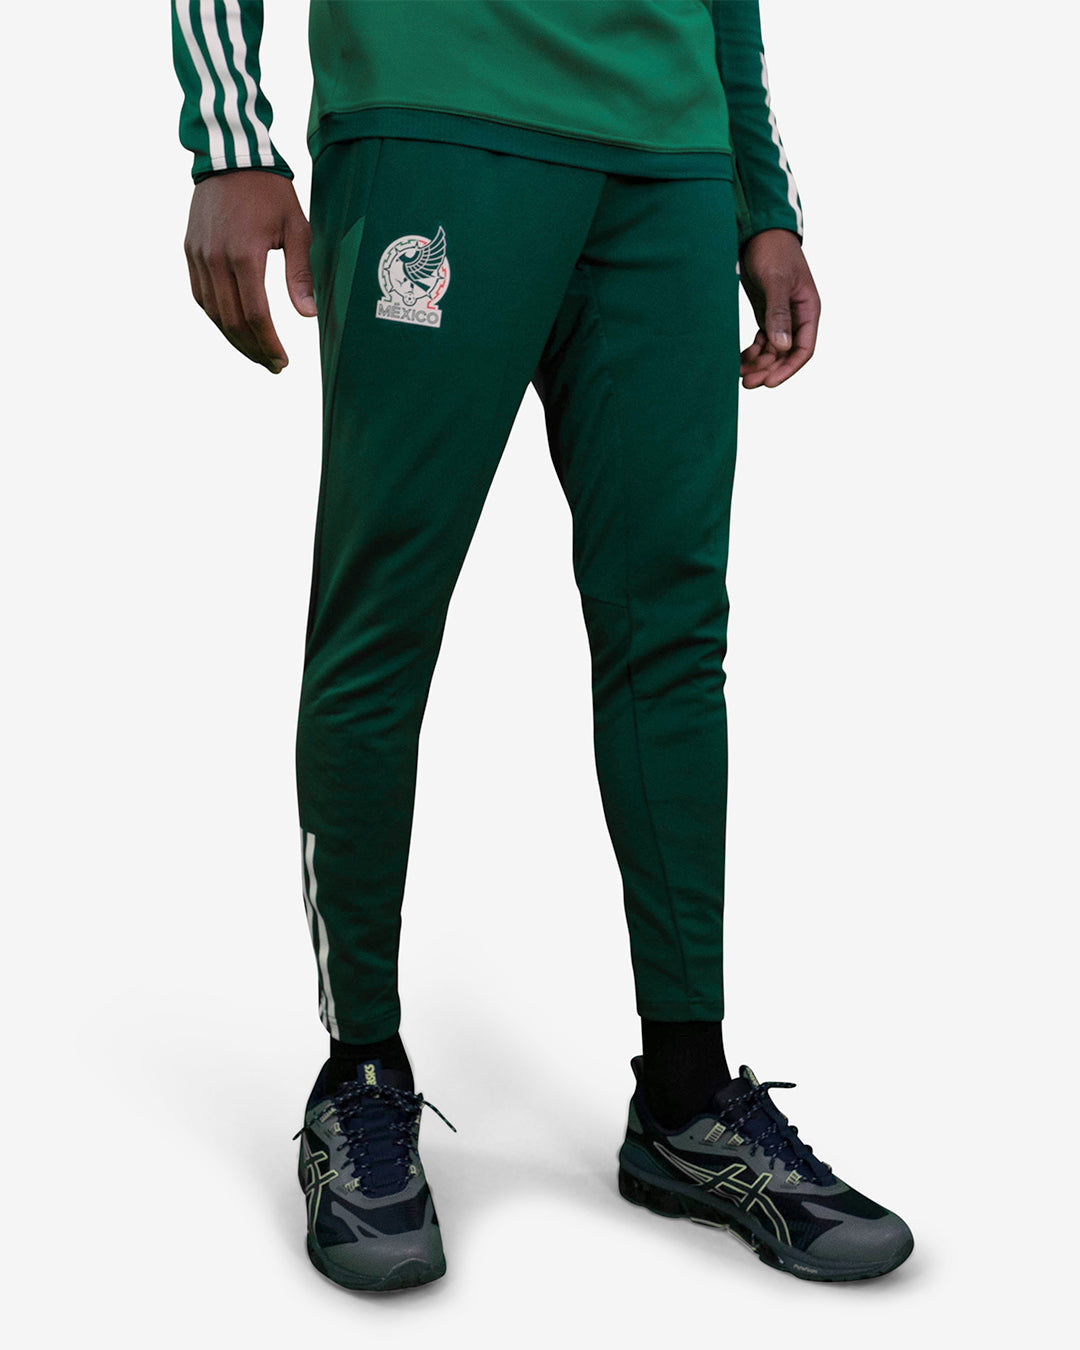 Wholesale football training pants For Effortless Playing  Alibabacom